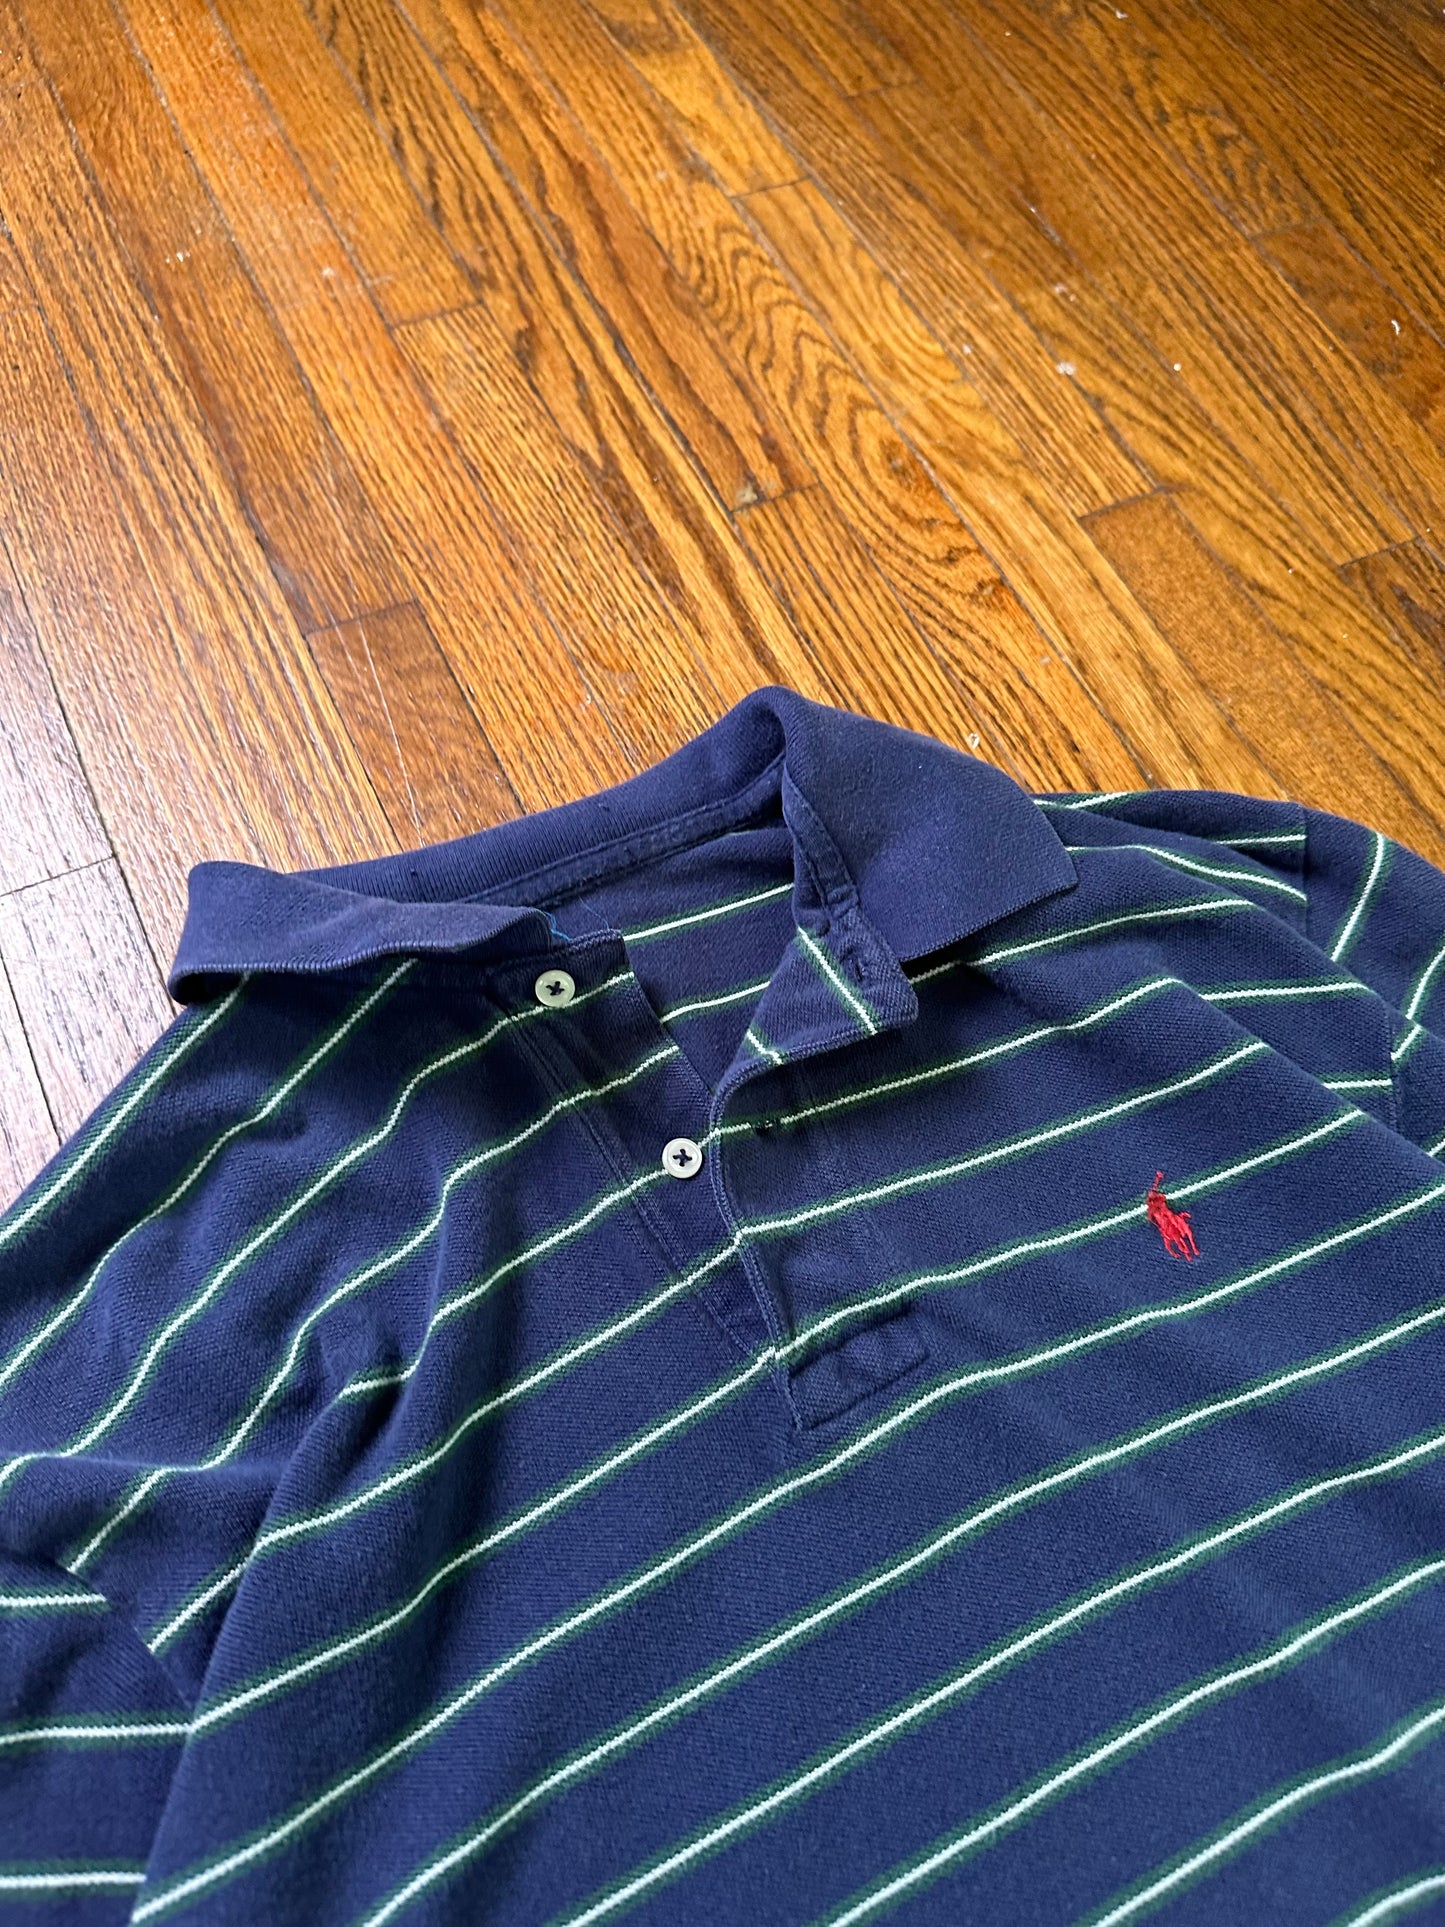 Navy Striped Polo Rugby Jersey - M